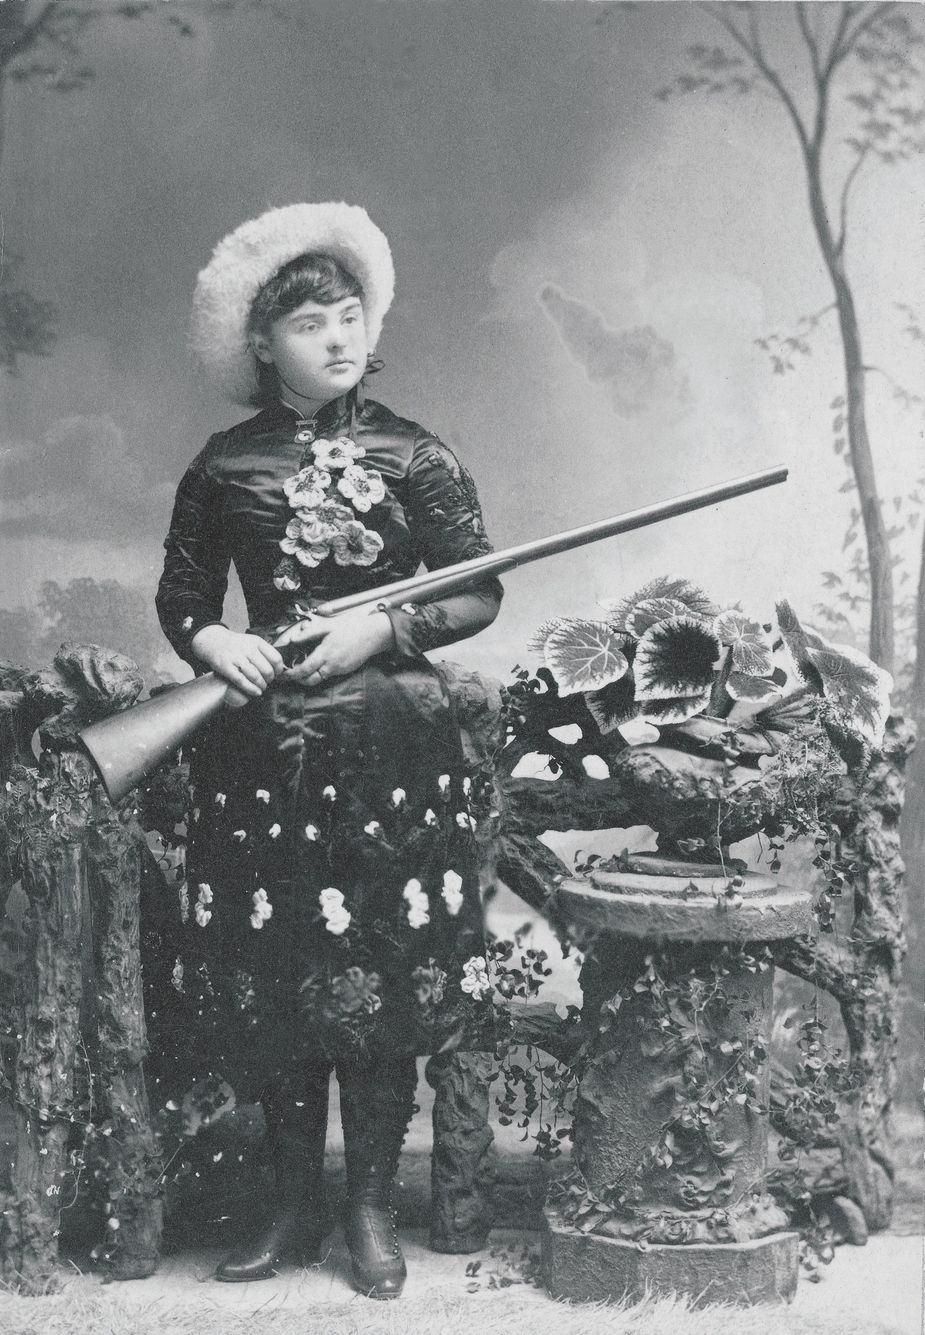 When Lillian Smith was a young girl, she challenged Doc Carver, a well-known marksman, to a shooting contest. His refusal to show up for the match became a point of pride for Smith.  Photo courtesy Buffalo Bill Center of the Wild West